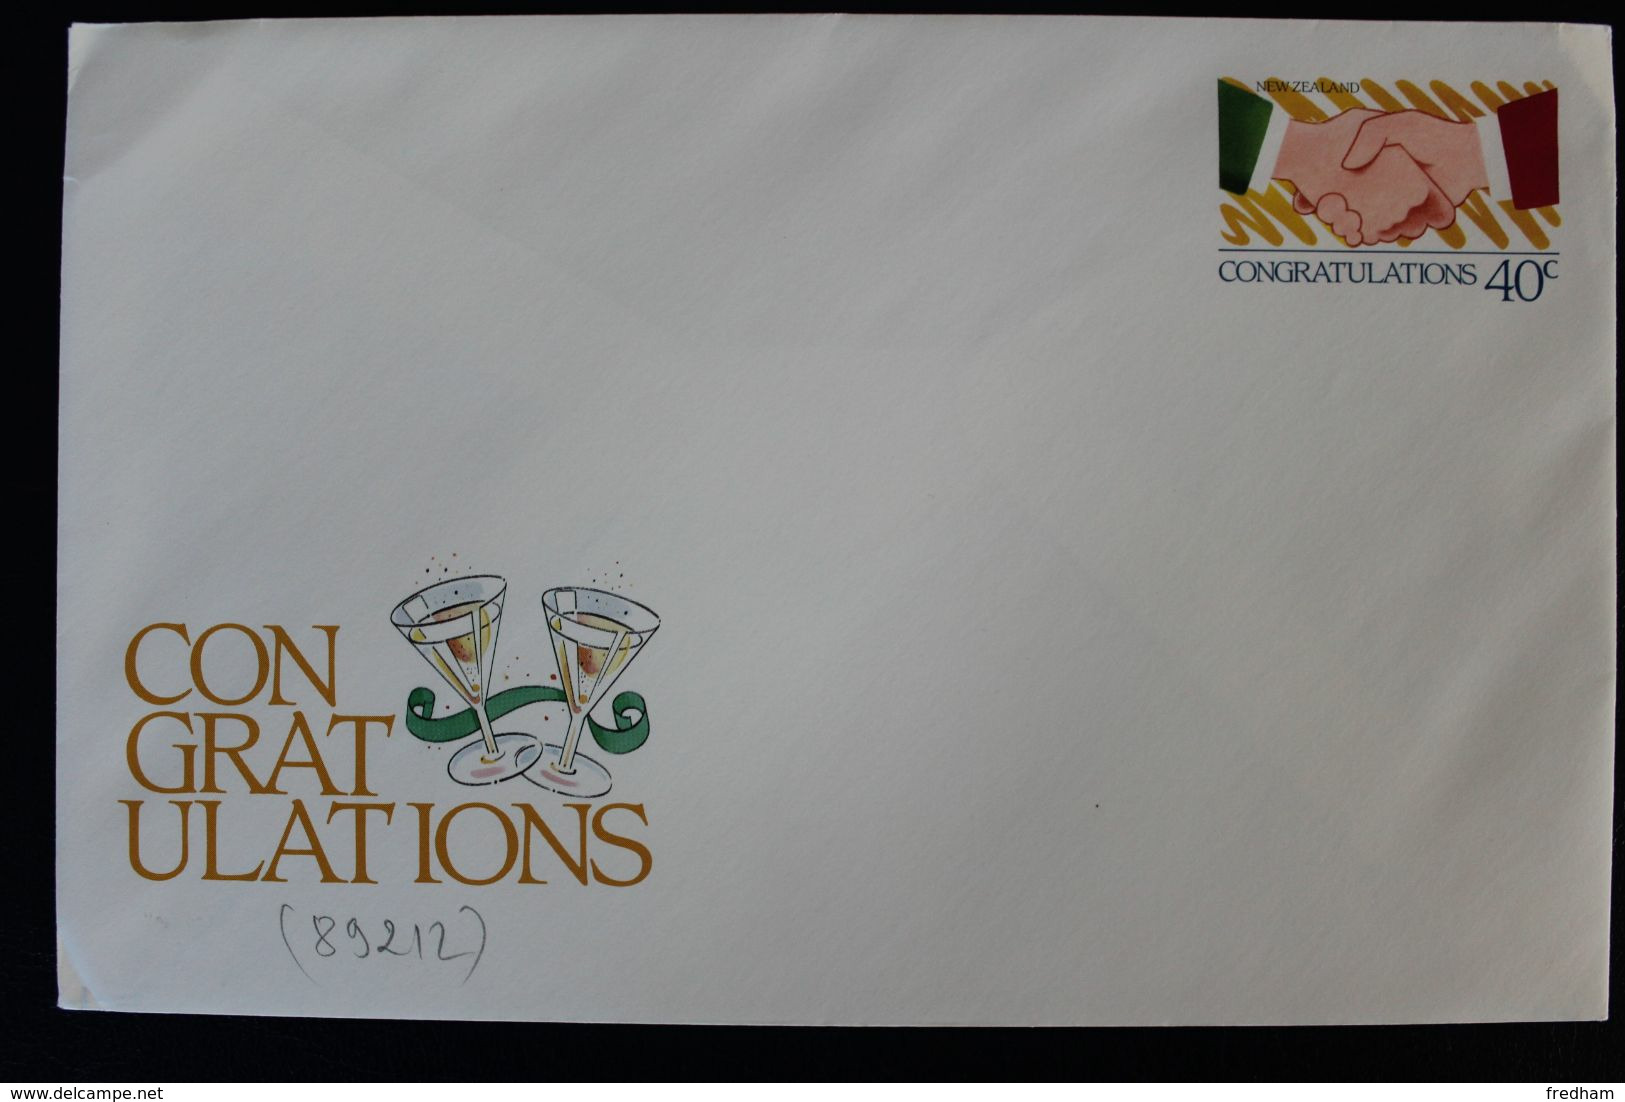 NEW ZEALAND POST PHILATELIC "SPECIAL OCCASION PRE STAMPED" ENVELOPPE NO2 40C - Entiers Postaux